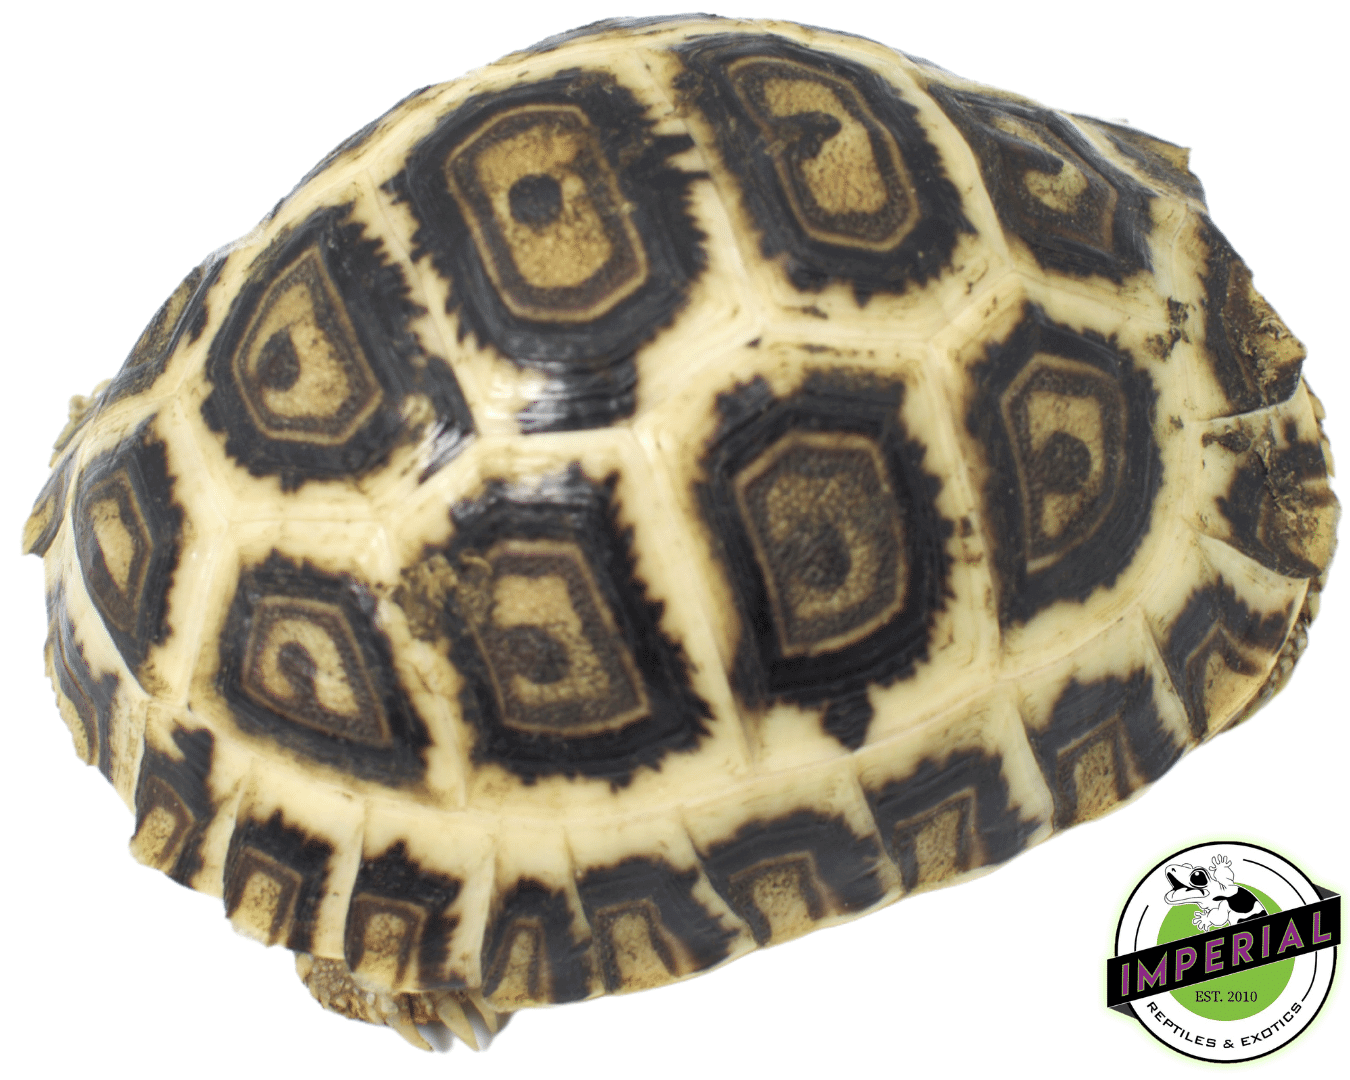 high blonde leopard tortoise for sale, buy reptiles online